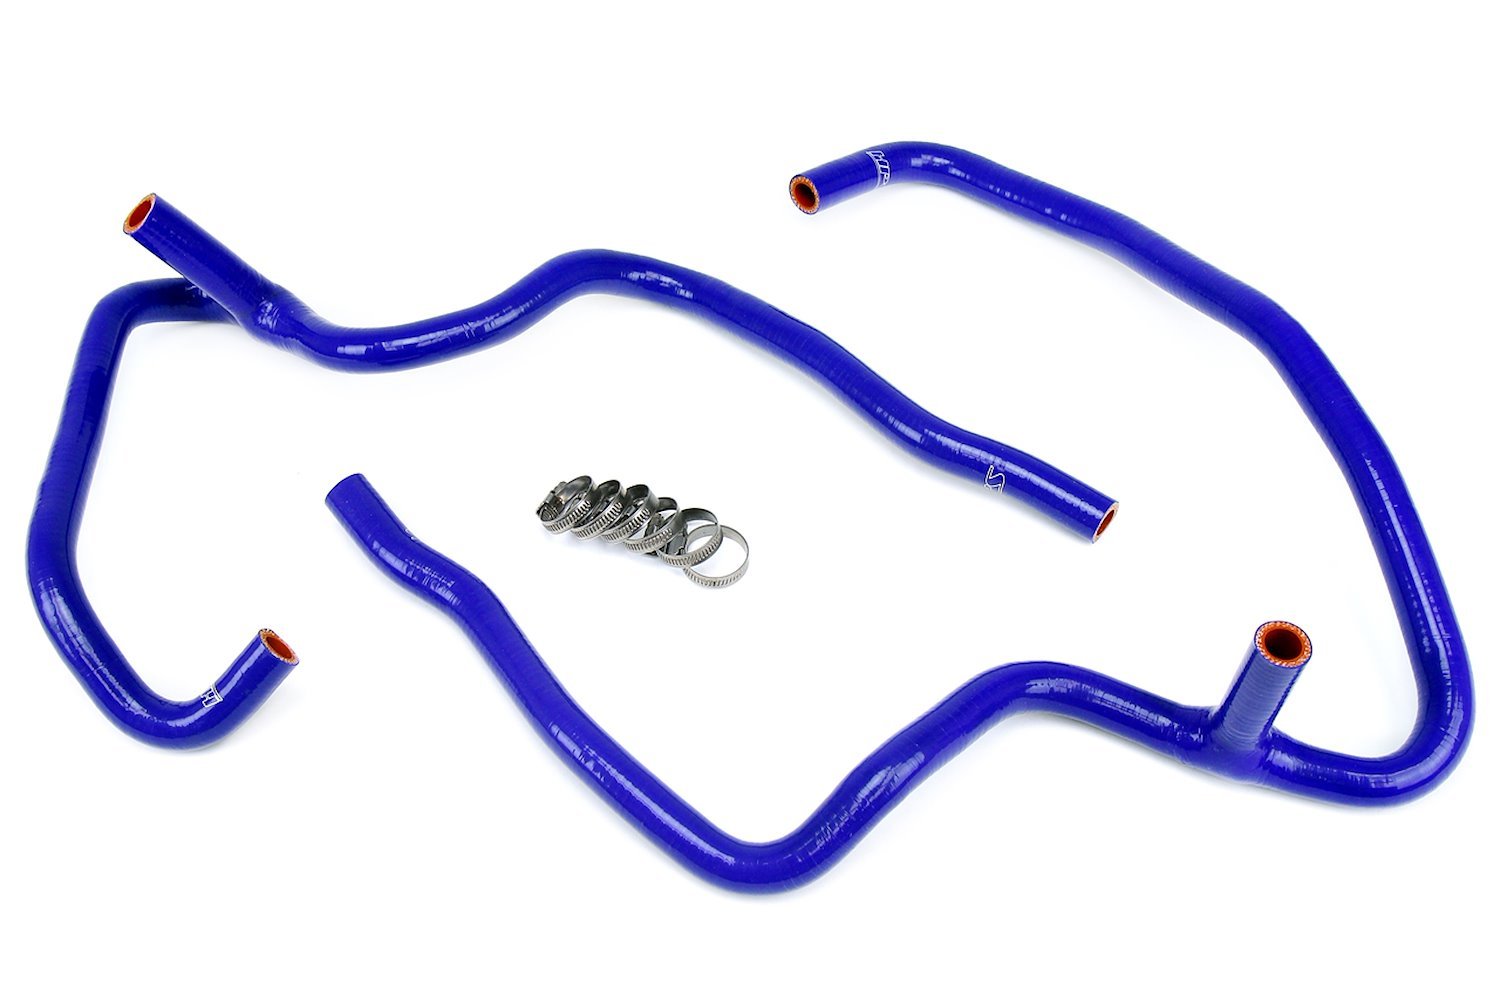 57-1472-BLUE Heater Hose Kit, High-Temp 3-Ply Reinforced Silicone, Replace OEM Rubber Heater Coolant Hoses